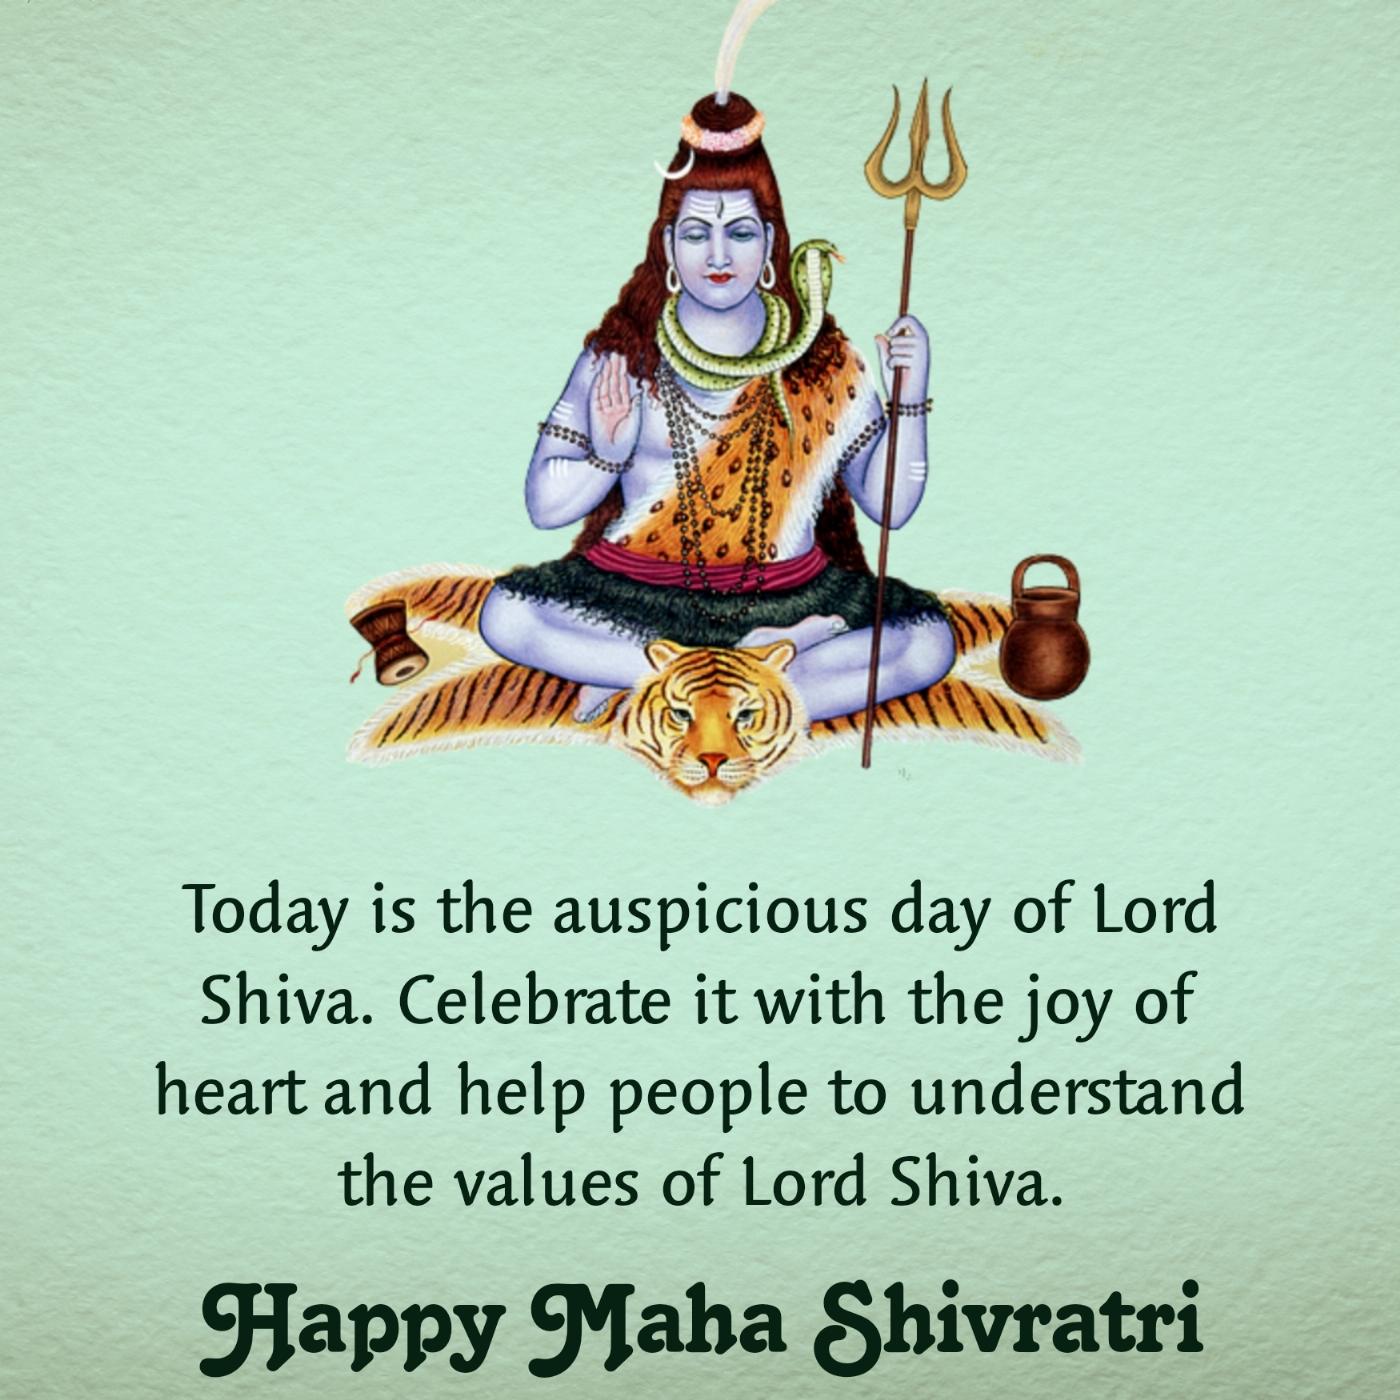 Today is the auspicious day of Lord Shiva